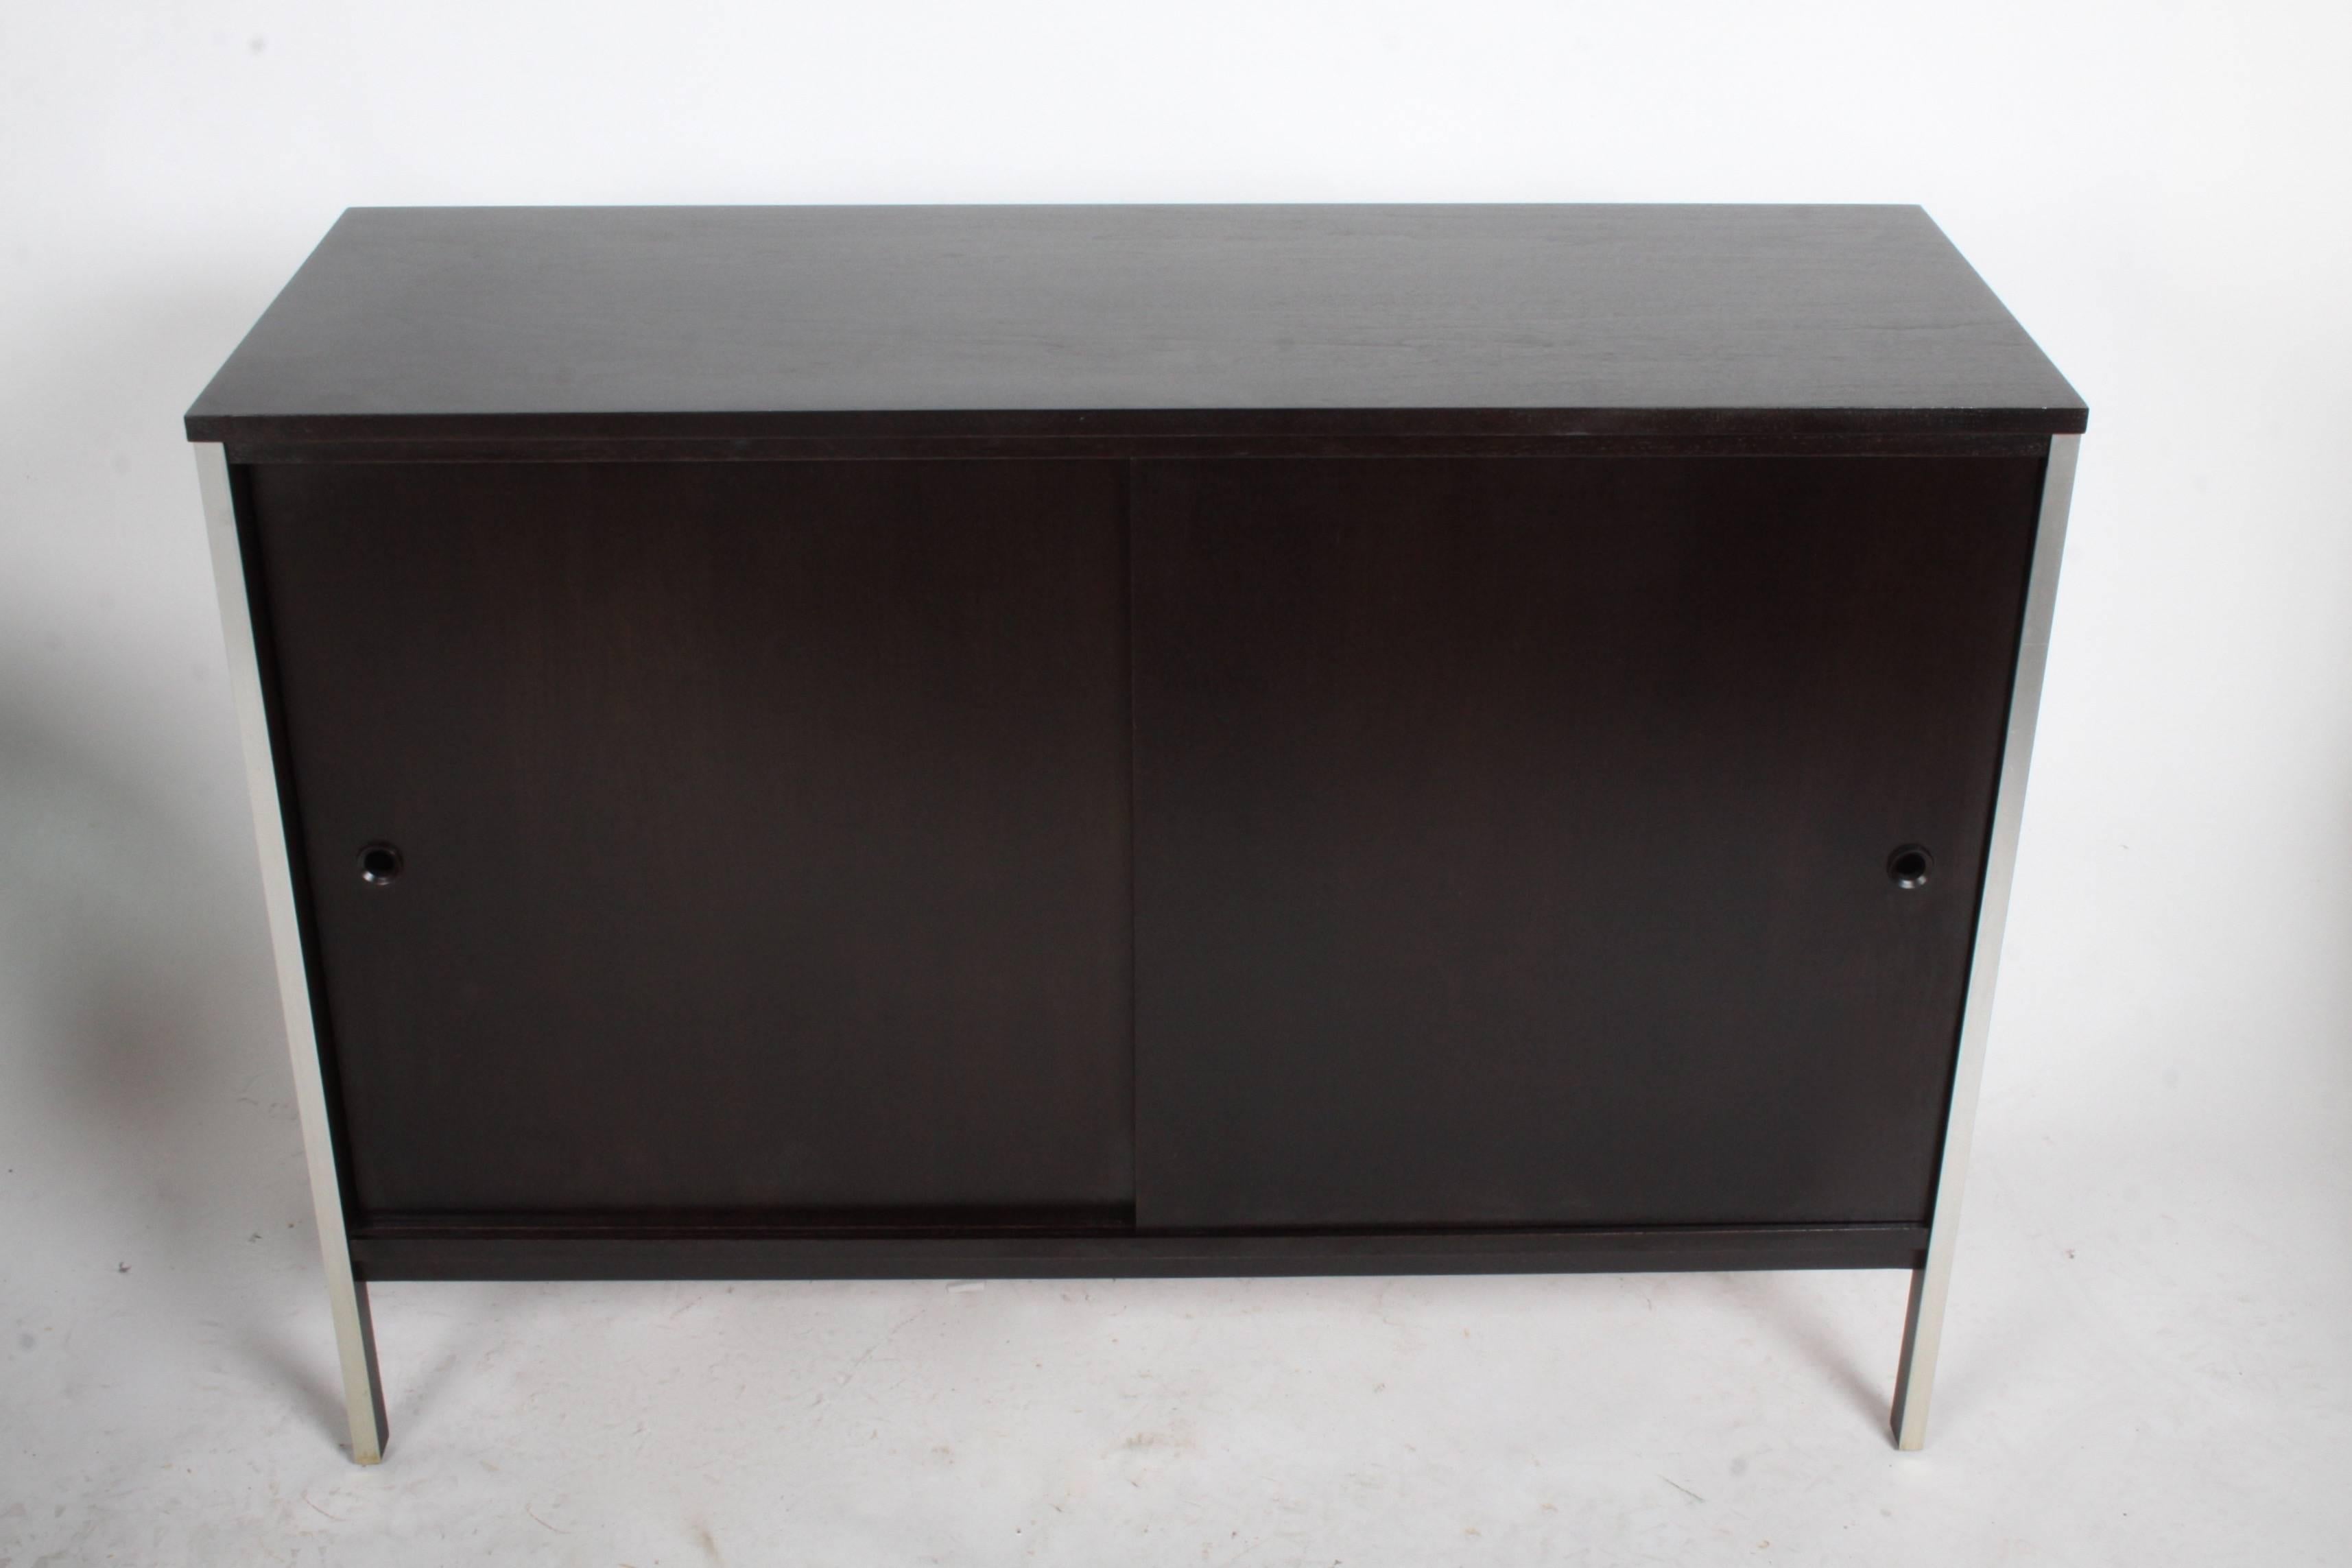 Pair of Paul McCobb for Calvin credenza refinished in dark espresso with sliding doors and aluminum trim. Each side has an adjustable shelf, shelf size is 23